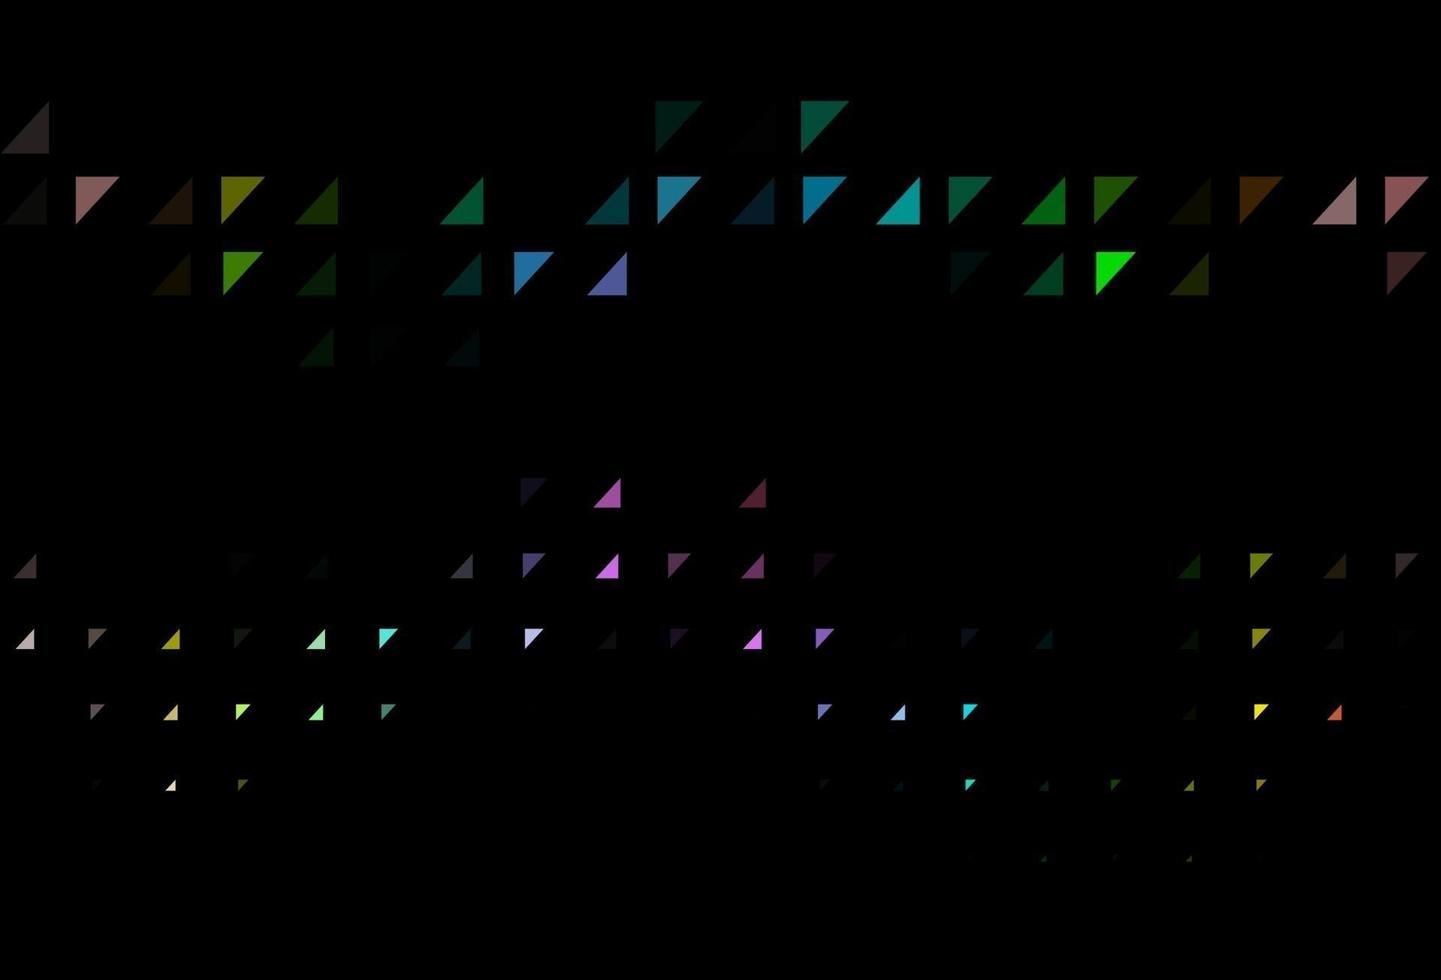 Dark Multicolor, Rainbow vector layout with circle shapes.